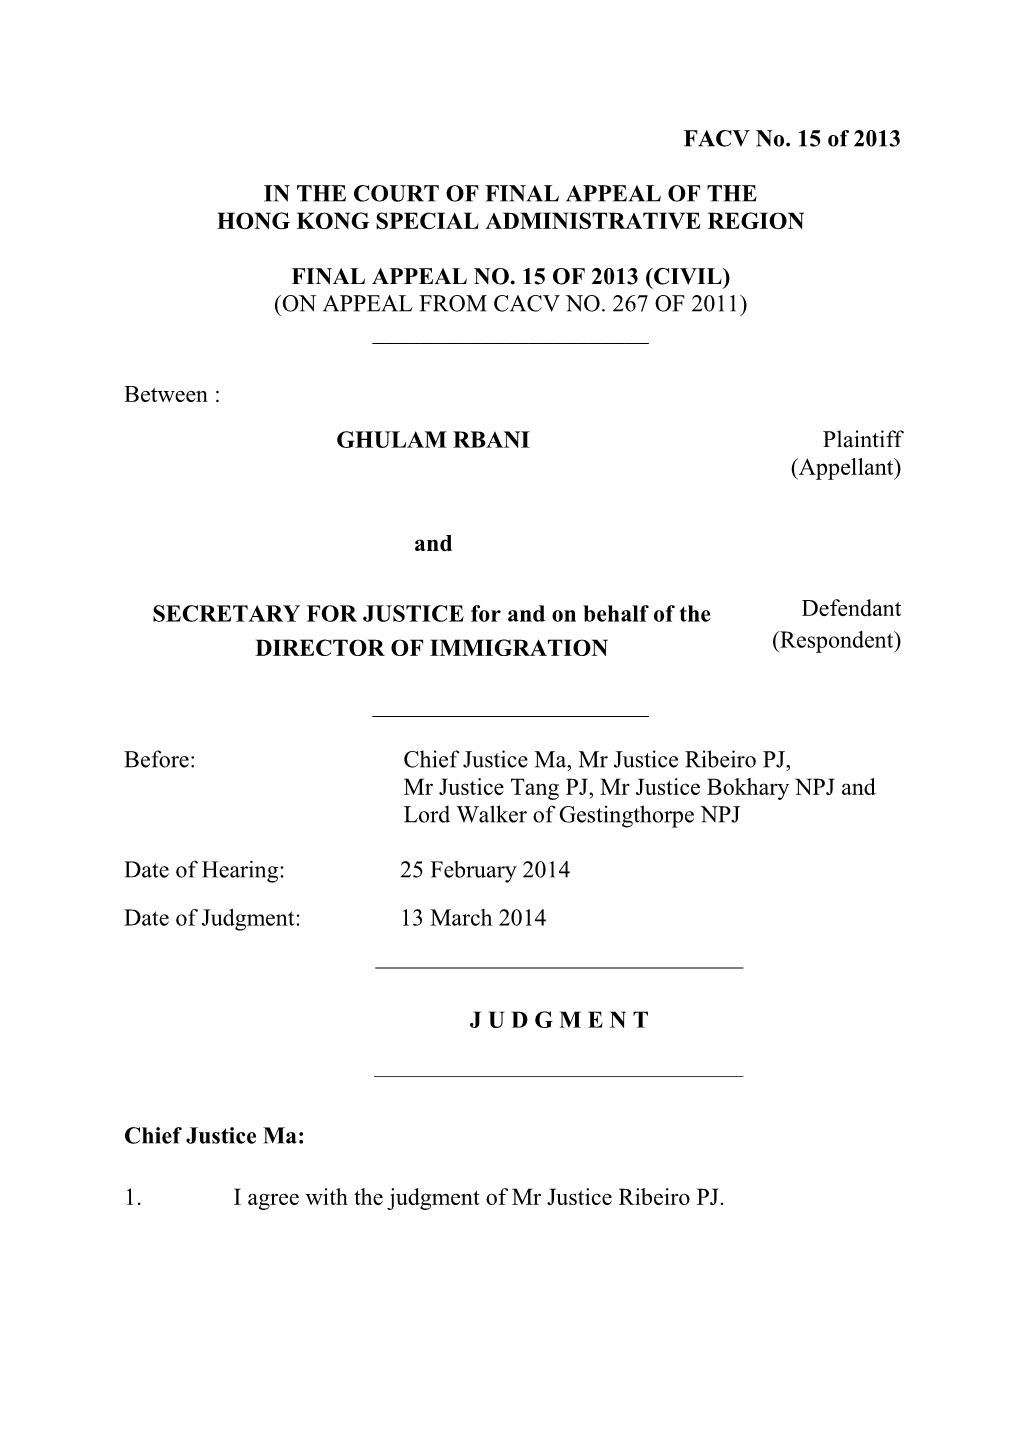 FACV No. 15 of 2013 in the COURT of FINAL APPEAL of the HONG